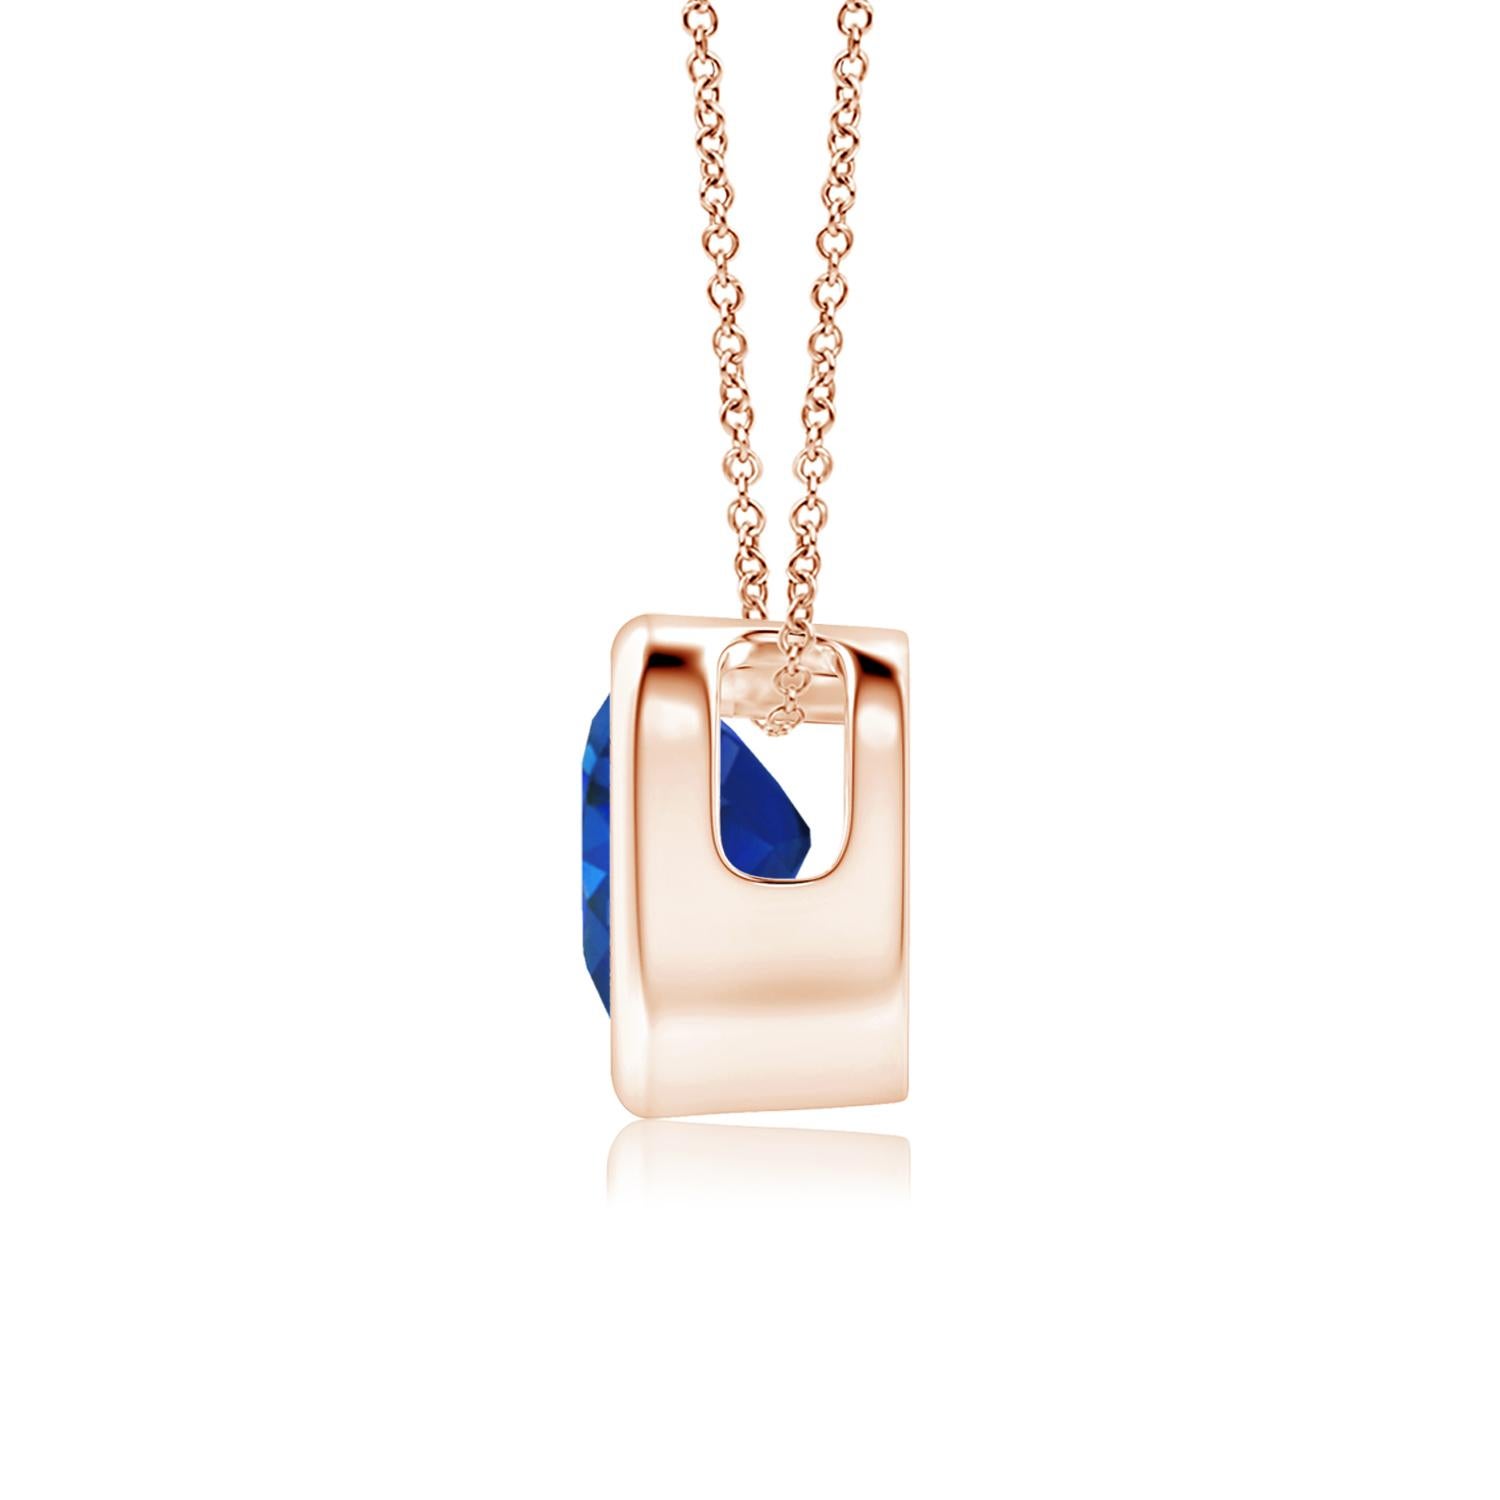 This classic solitaire sapphire pendant will steal your heart with its gleaming blue beauty. Crafted in 14k rose gold, its design showcases a heart-shaped sapphire secured in a bezel setting.
Blue Sapphire is the Birthstone for September and